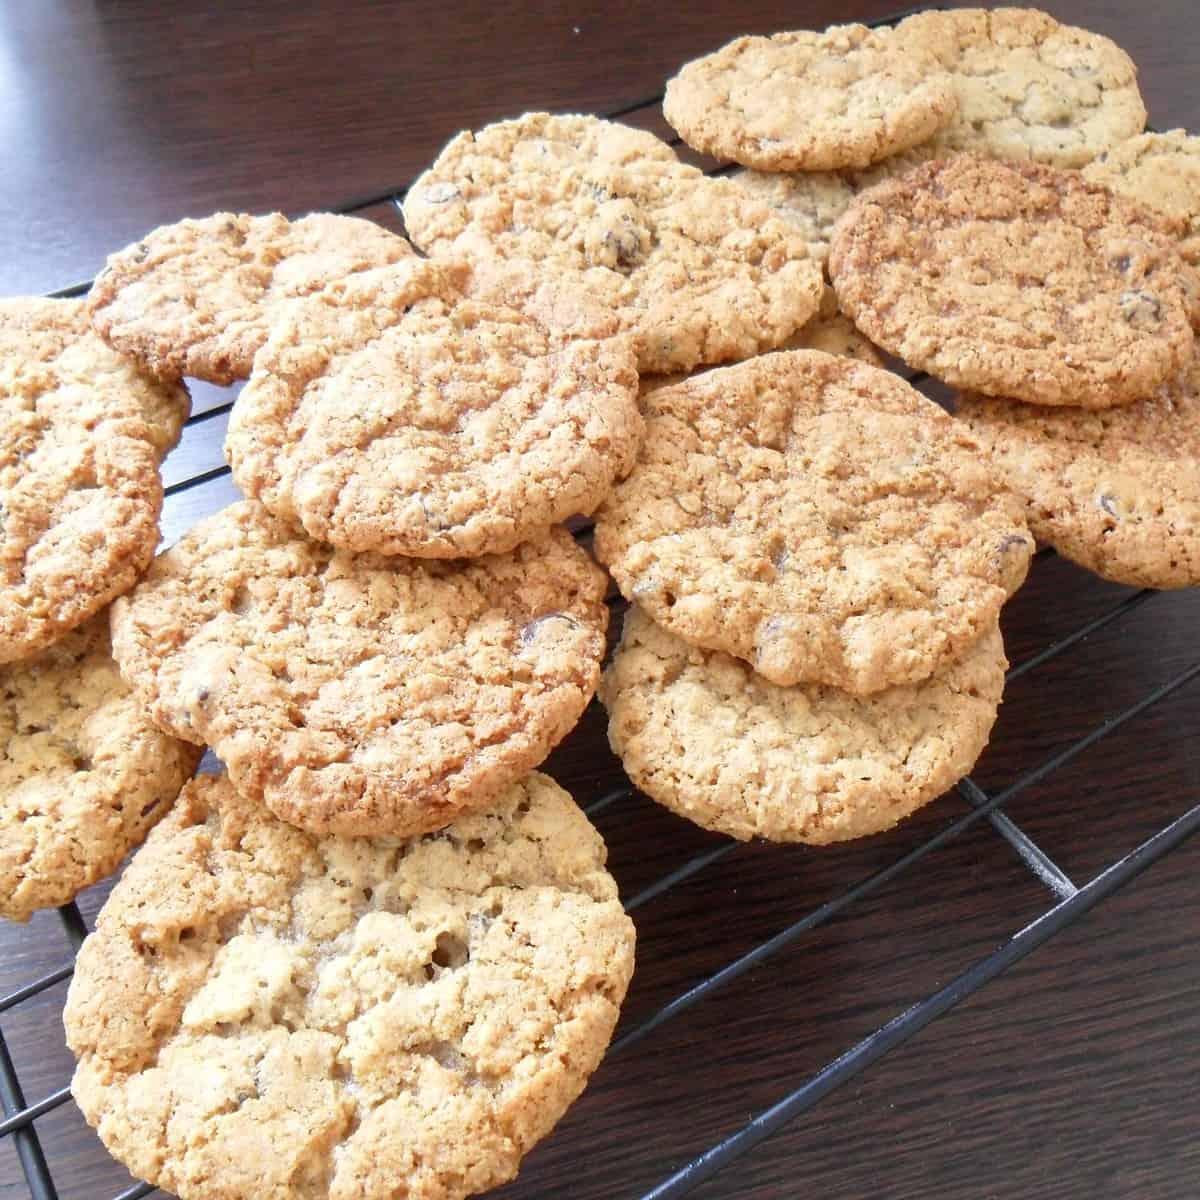  These cookies are so delicious, nobody would guess they're vegan!